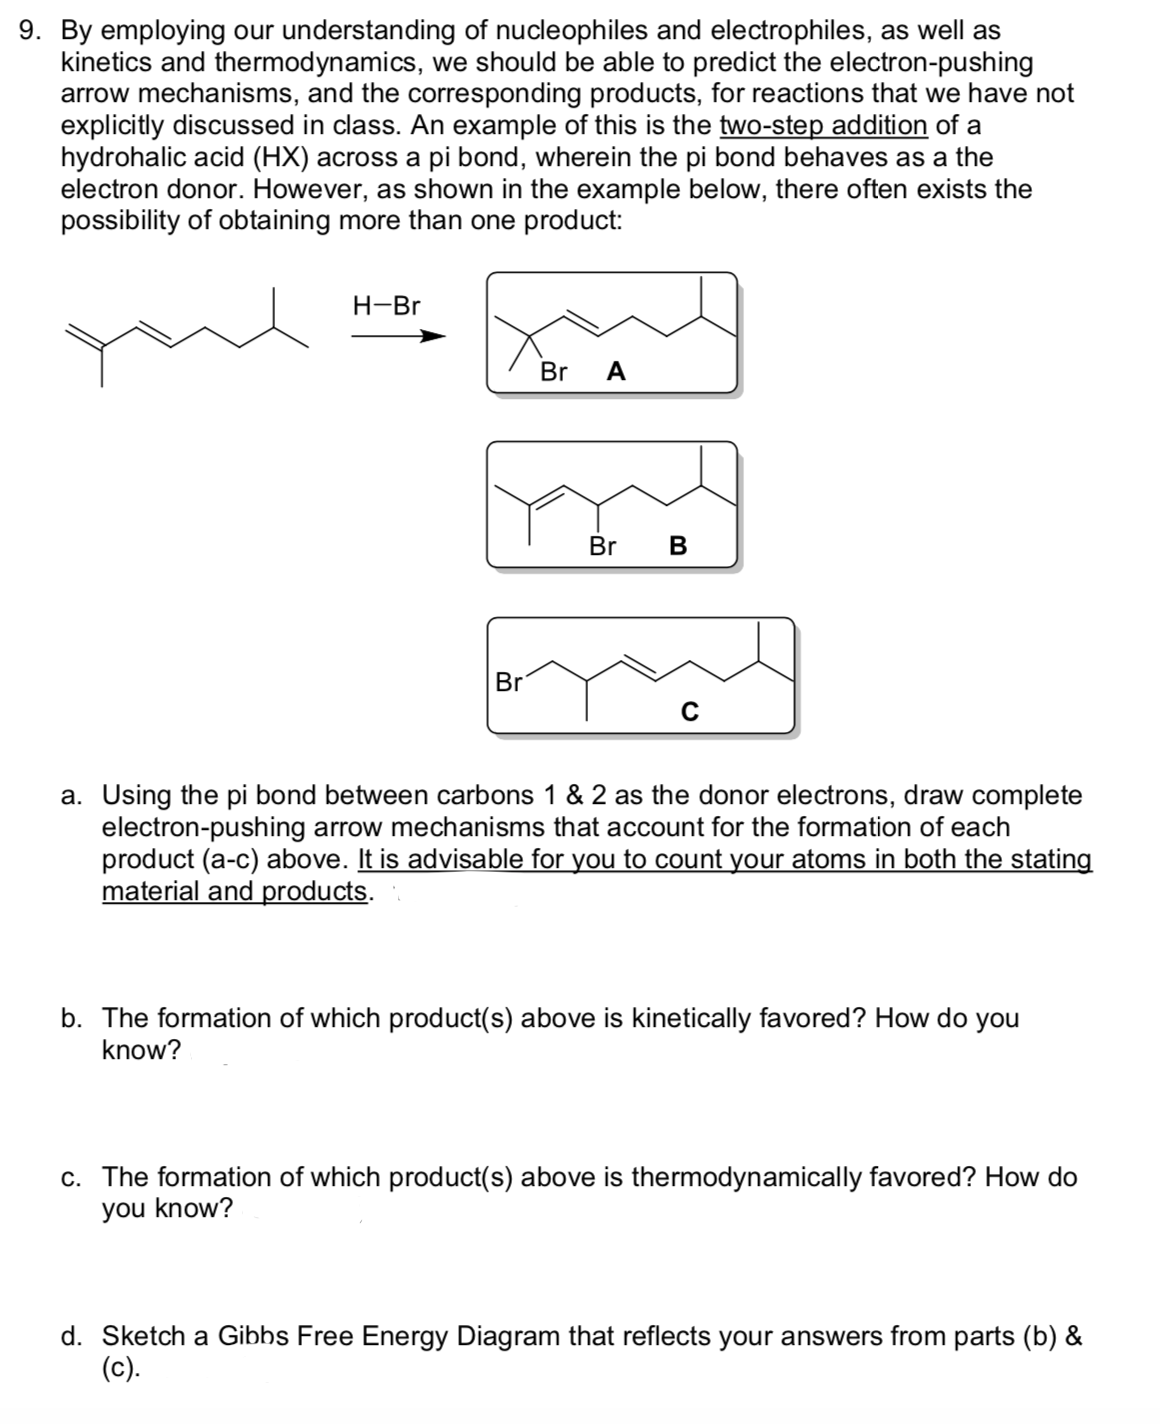 9. By employing our understanding of nucleophiles and electrophiles, as well as
kinetics and thermodynamics, we should be able to predict the electron-pushing
arrow mechanisms, and the corresponding products, for reactions that we have not
explicitly discussed in class. An example of this is the two-step addition of a
hydrohalic acid (HX) across a pi bond, wherein the pi bond behaves as a the
electron donor. However, as shown in the example below, there often exists the
possibility of obtaining more than one product:
H-Br
Br
A
Br B
Br
a. Using the pi bond between carbons 1 & 2 as the donor electrons, draw complete
electron-pushing arrow mechanisms that account for the formation of each
product (a-c) above. It is advisable for you to count your atoms in both the stating
material and products.
b. The formation of which product(s) above is kinetically favored? How do you
know?
c. The formation of which product(s) above is thermodynamically favored? How do
you know?
d. Sketch a Gibbs Free Energy Diagram that reflects your answers from parts (b) &
(c).
